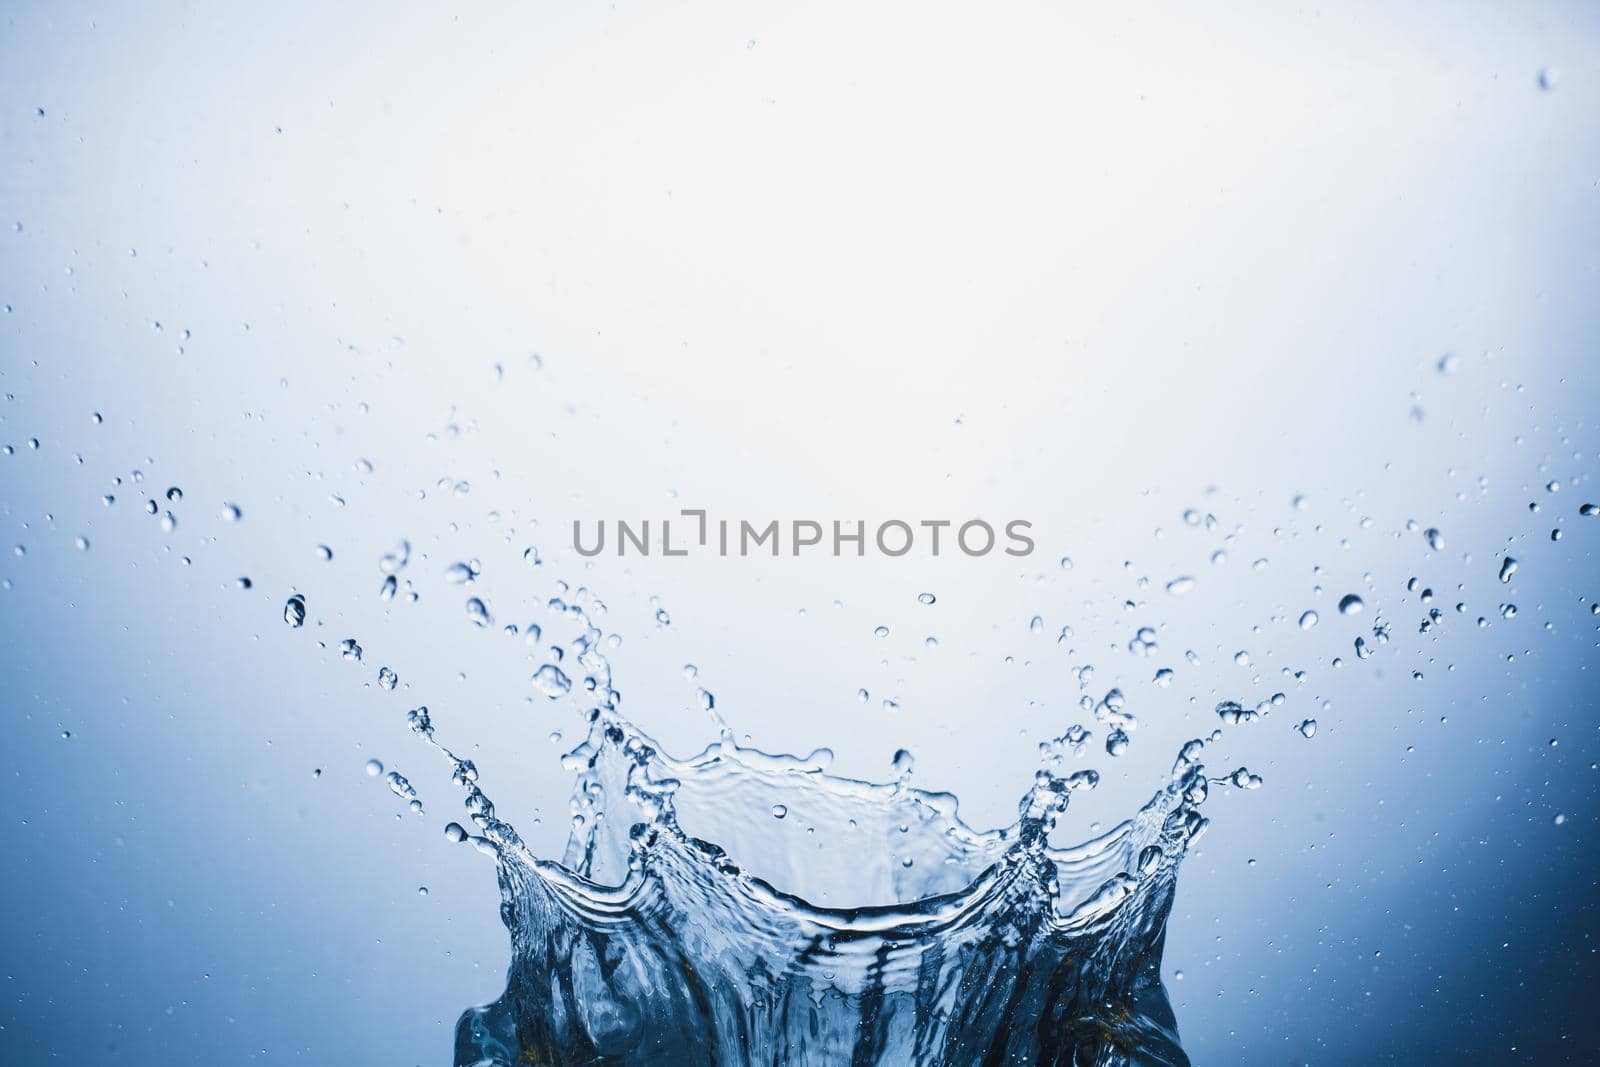 Water splash abstract by Wasant